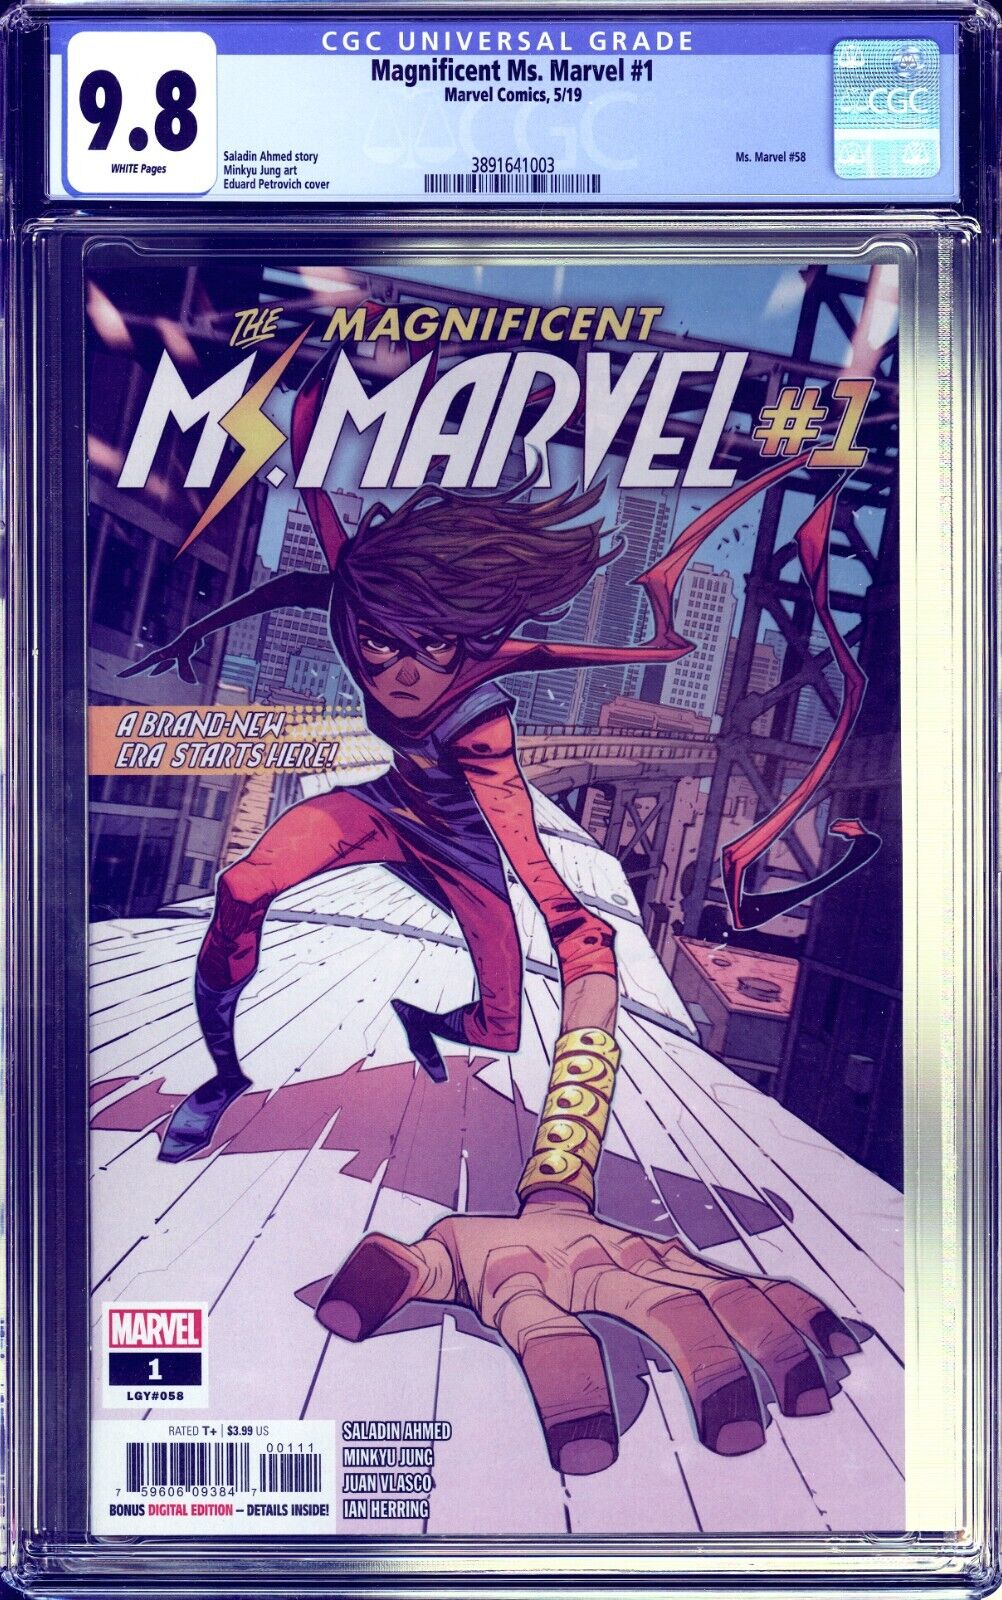 MAGNIFICENT MS MARVEL #1 CGC 9.8 *NEAR MINT/MINT (May 2019) * white pages